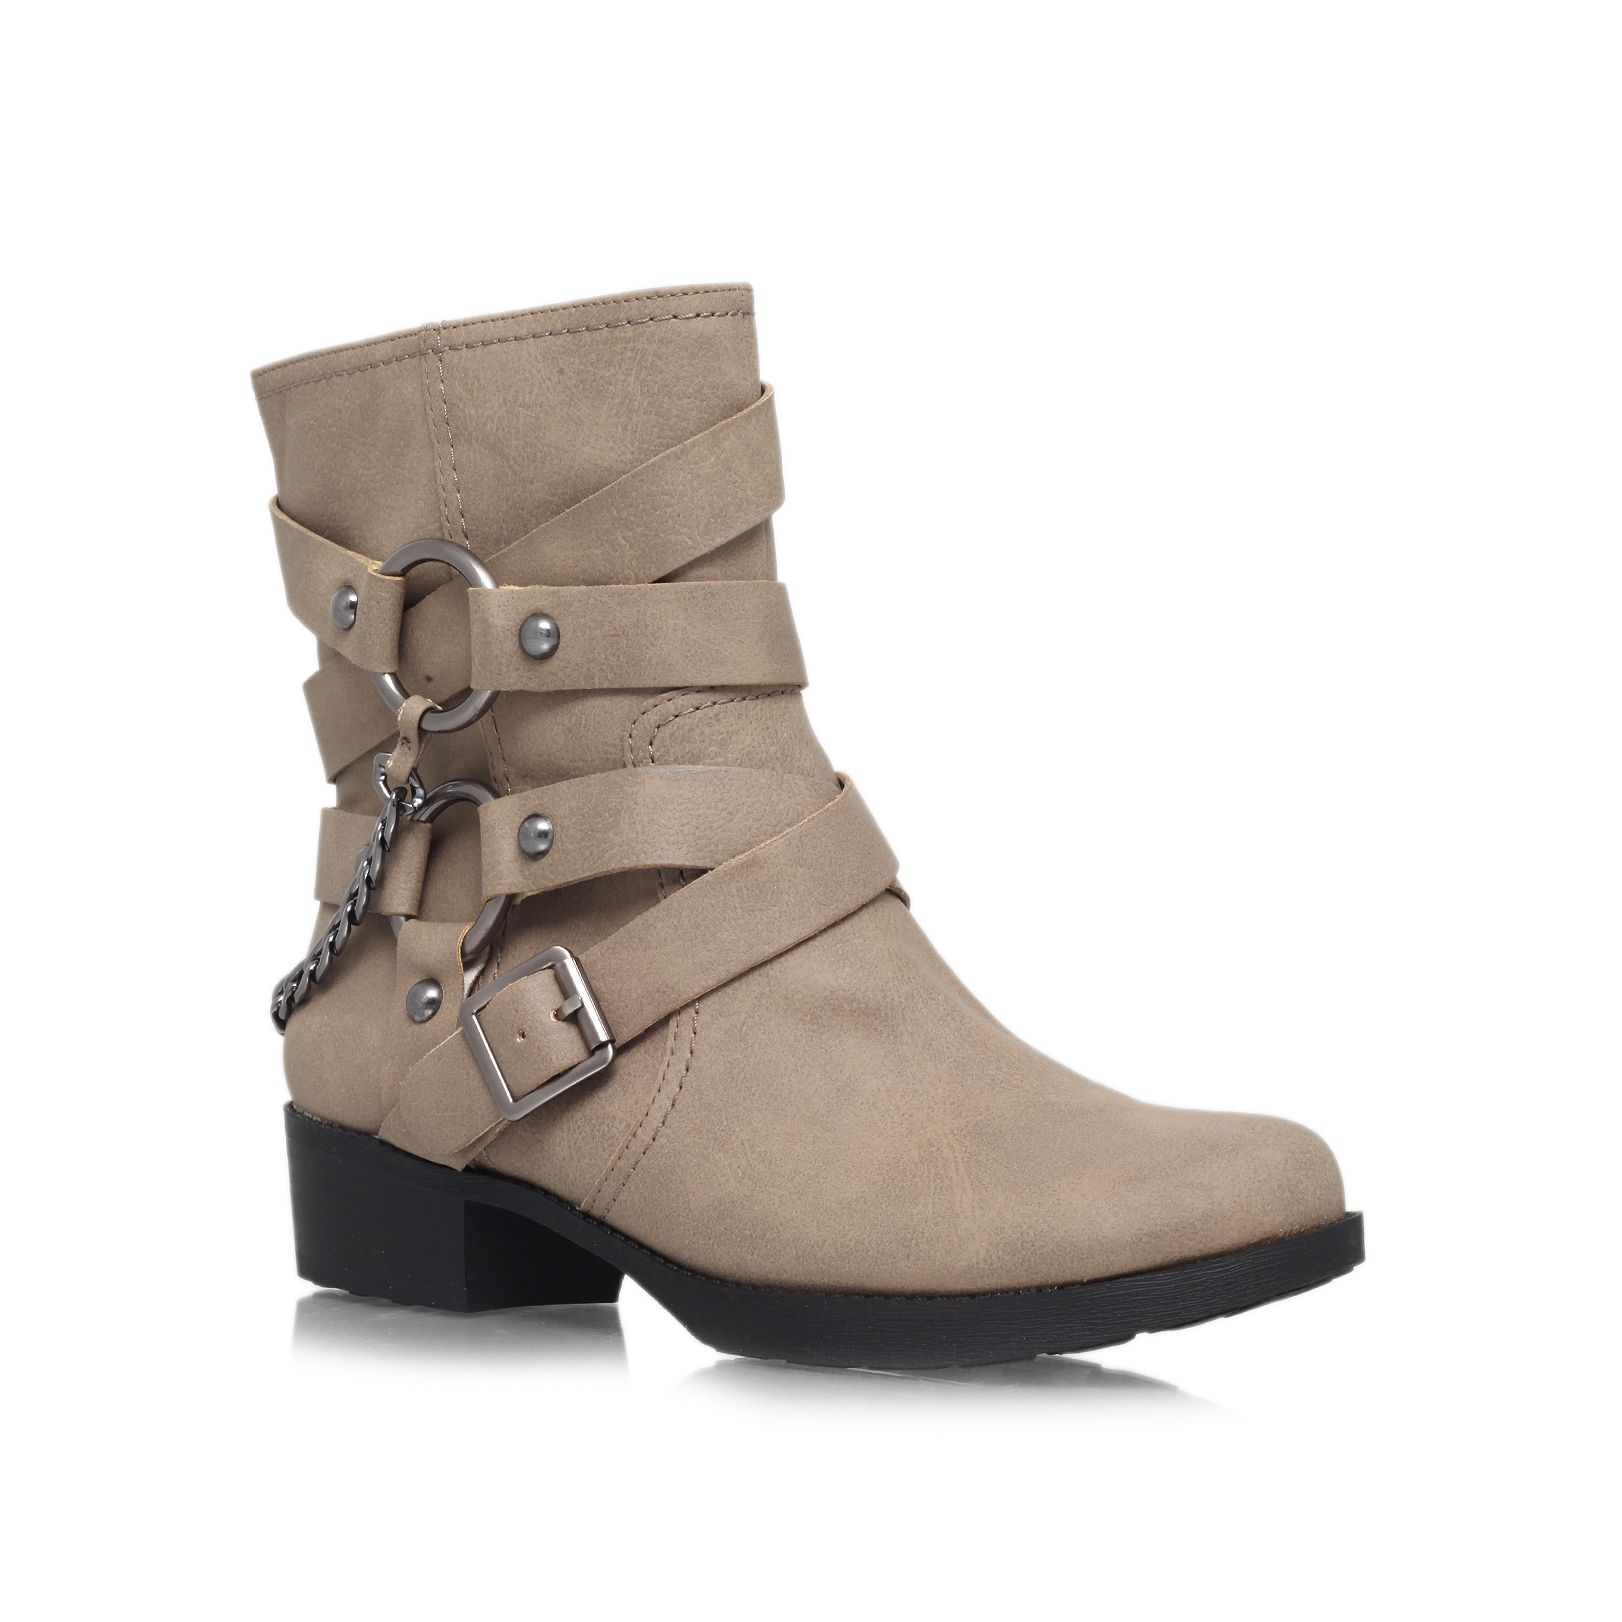 Jessica simpson Goldi Ankle Boots in Natural | Lyst